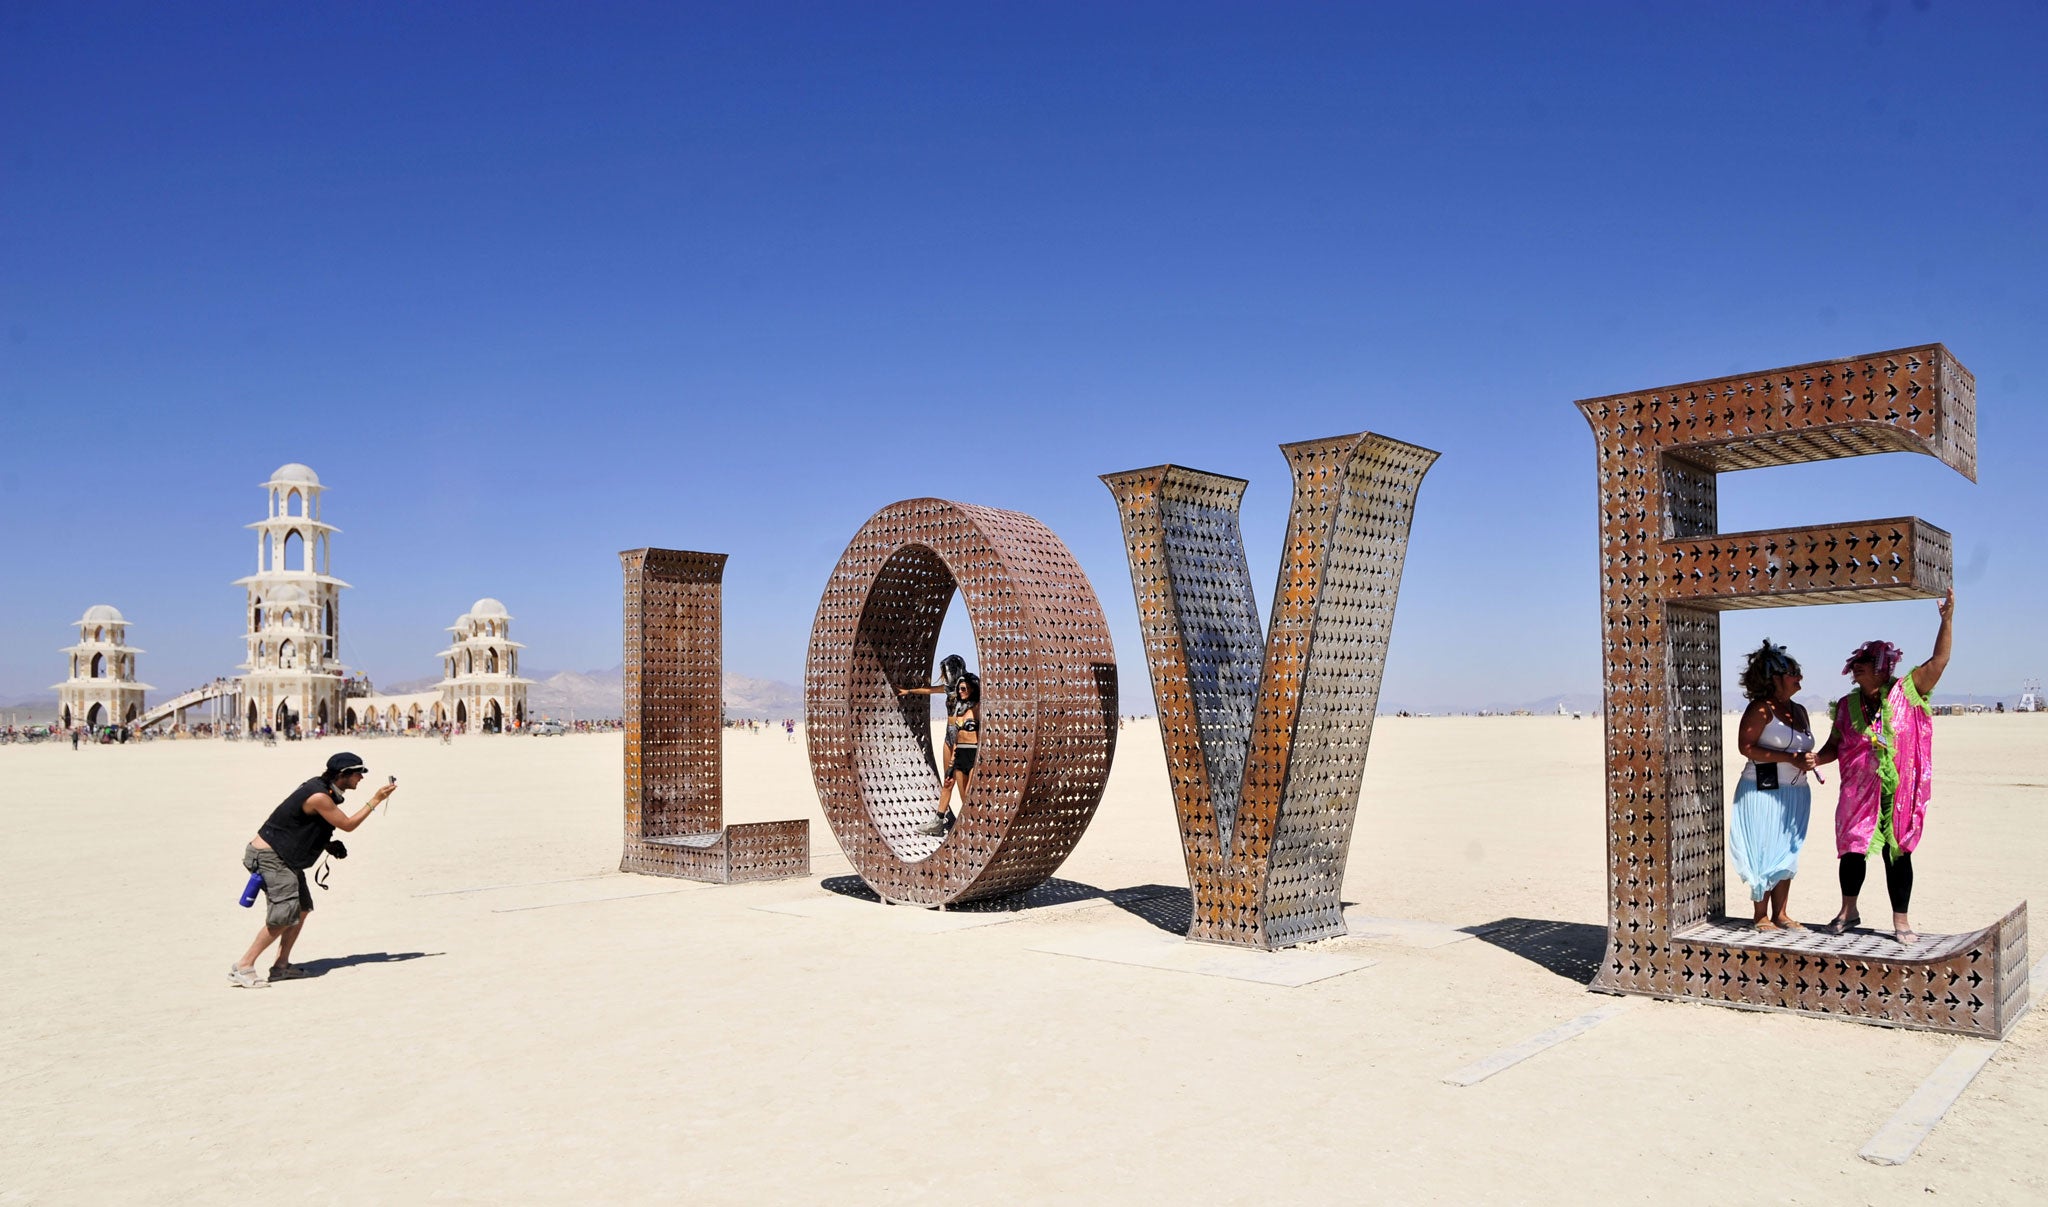 The annual Burning Man festival has delayed its gates from opening after severe rainstorms